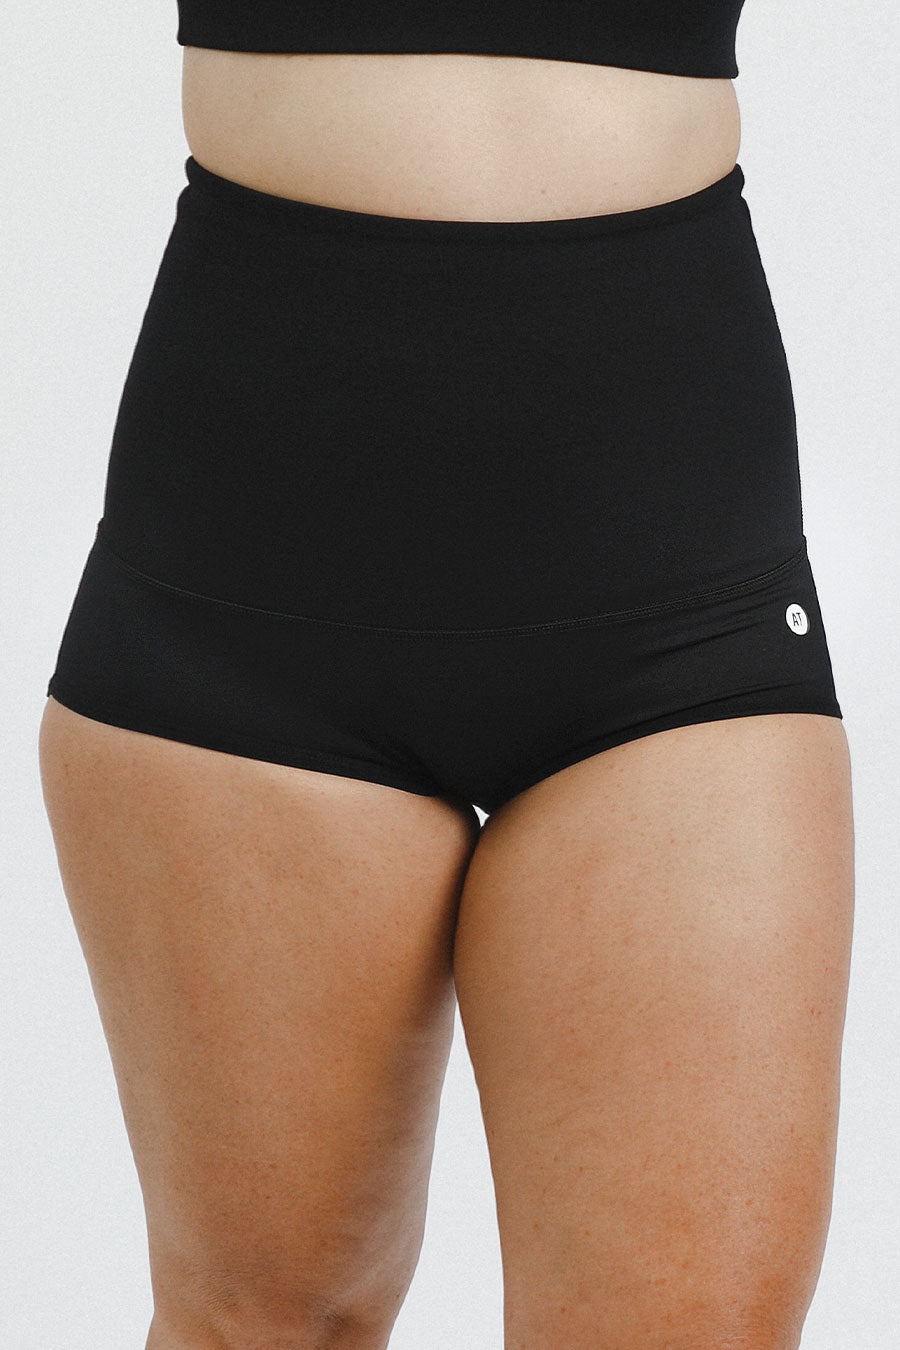 Recovery Support Brief - Black